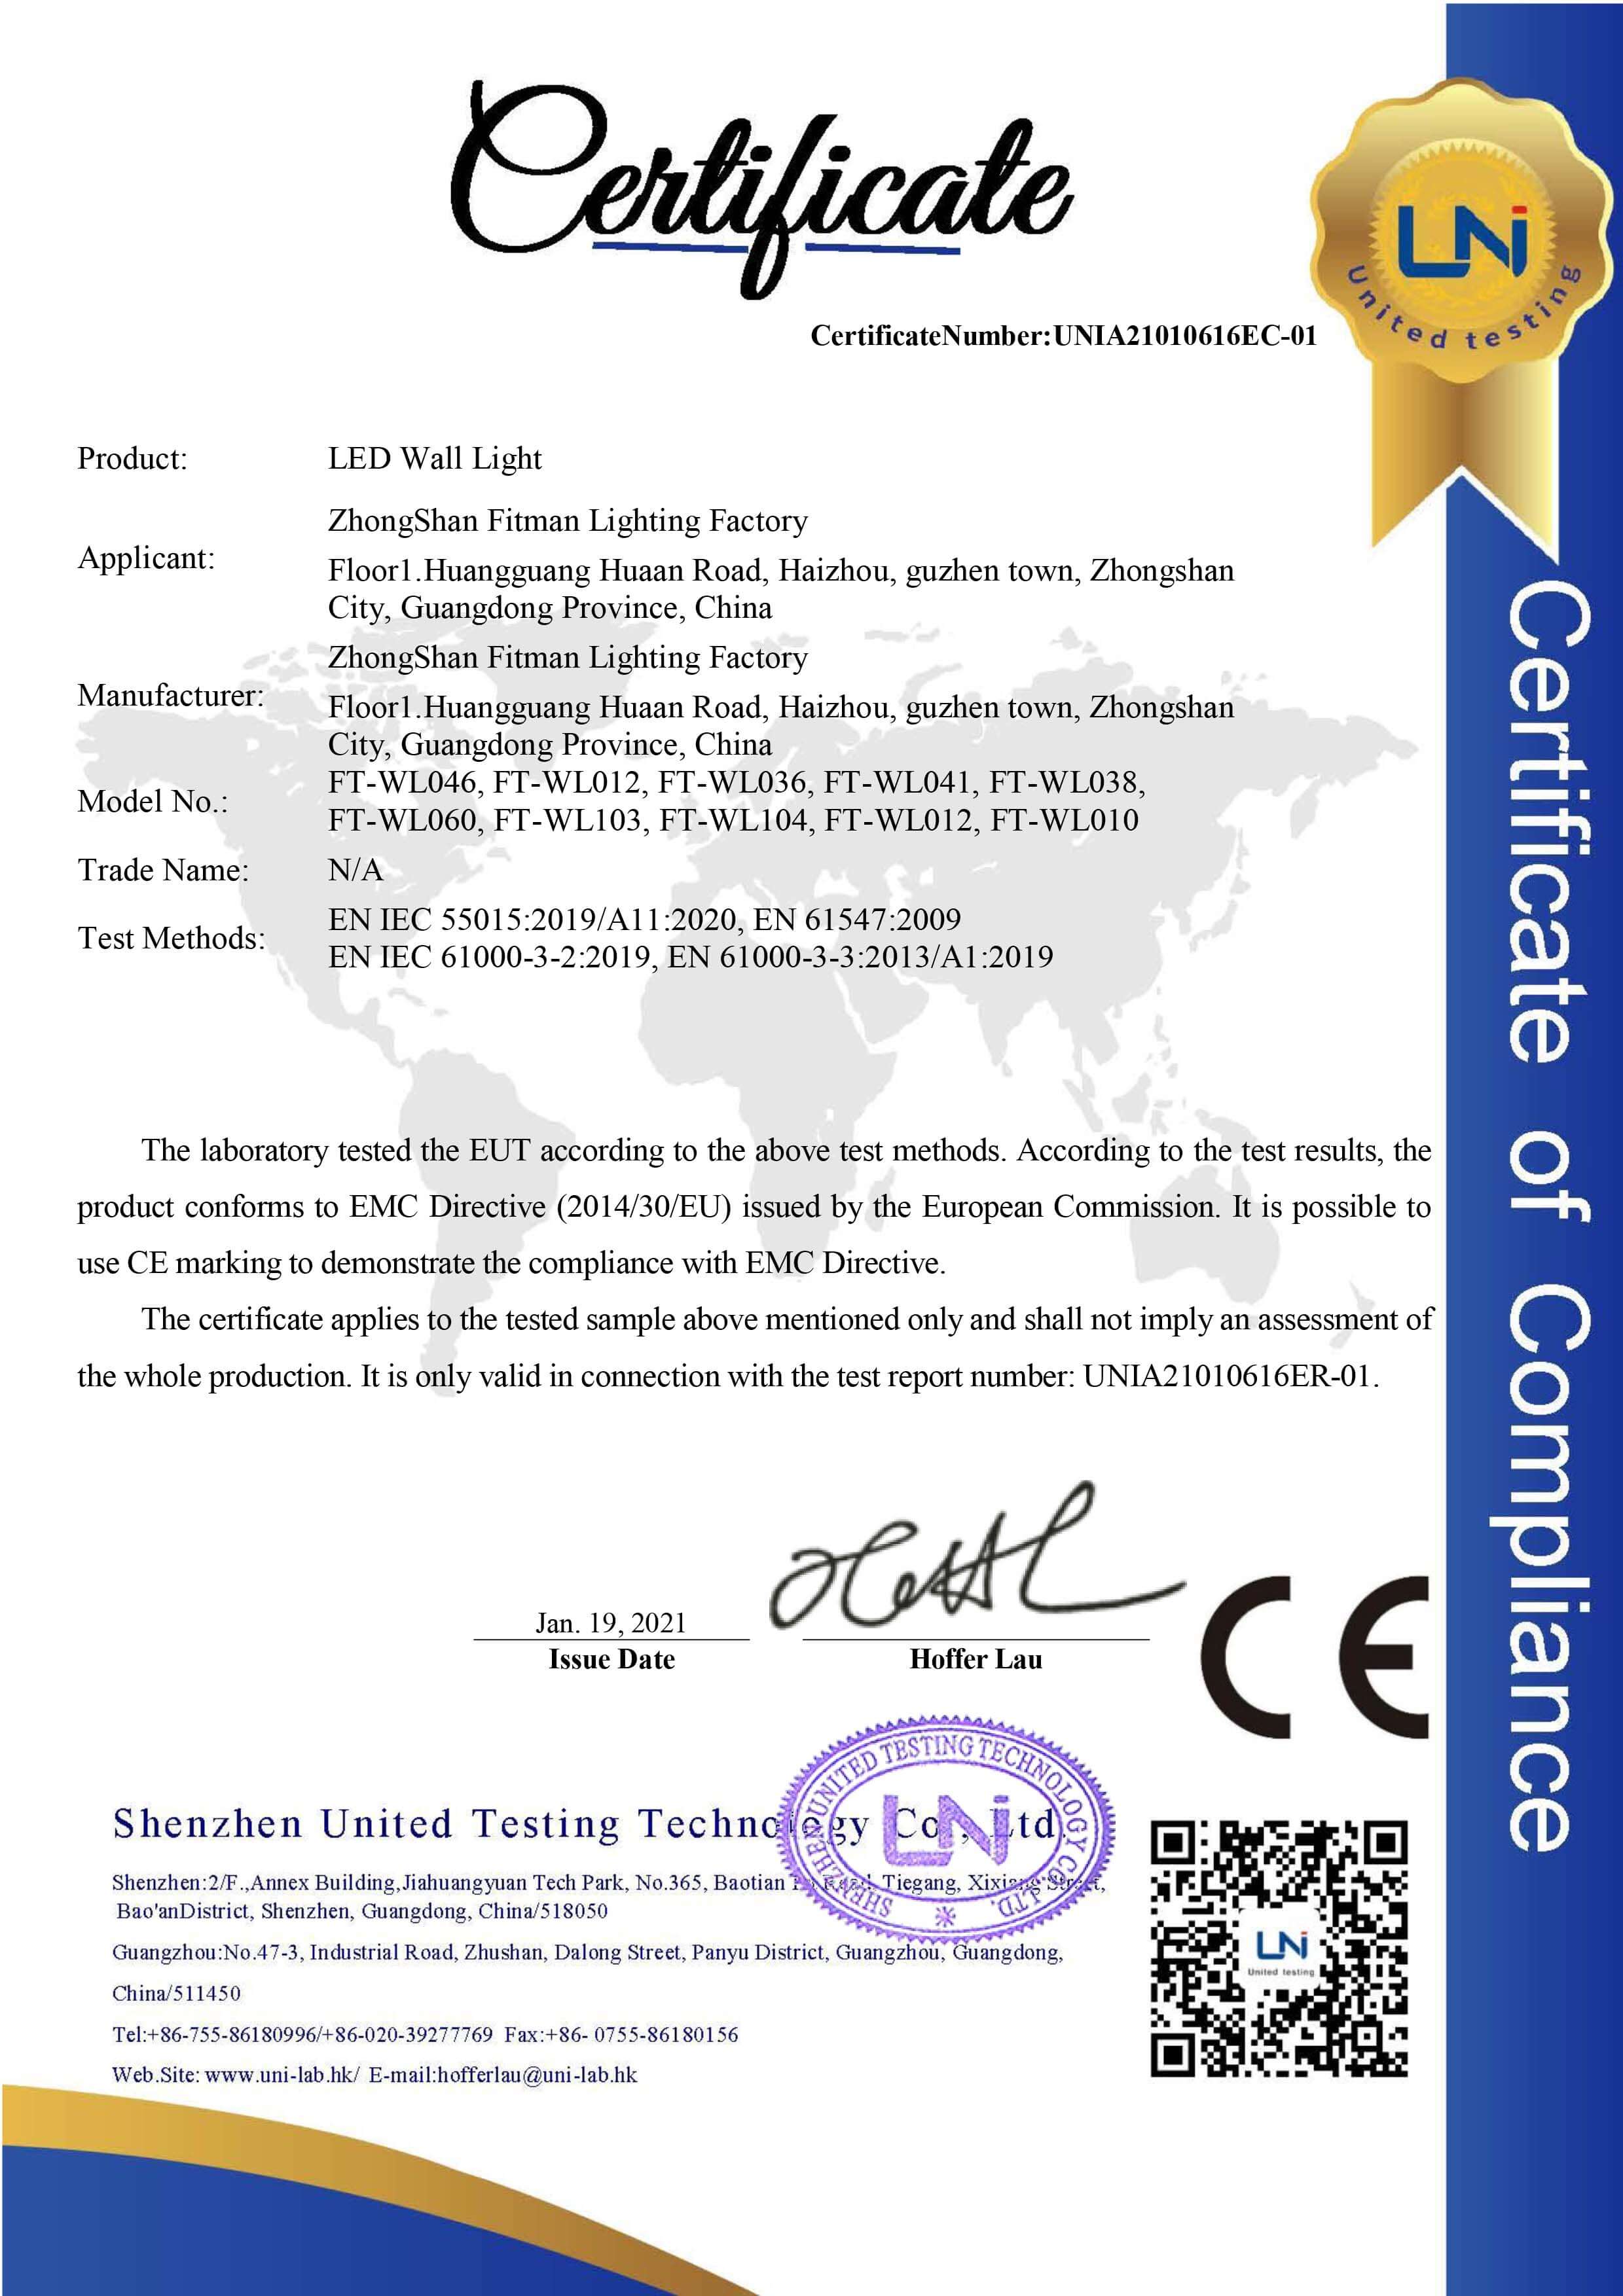 LED WALL Light CE certificate